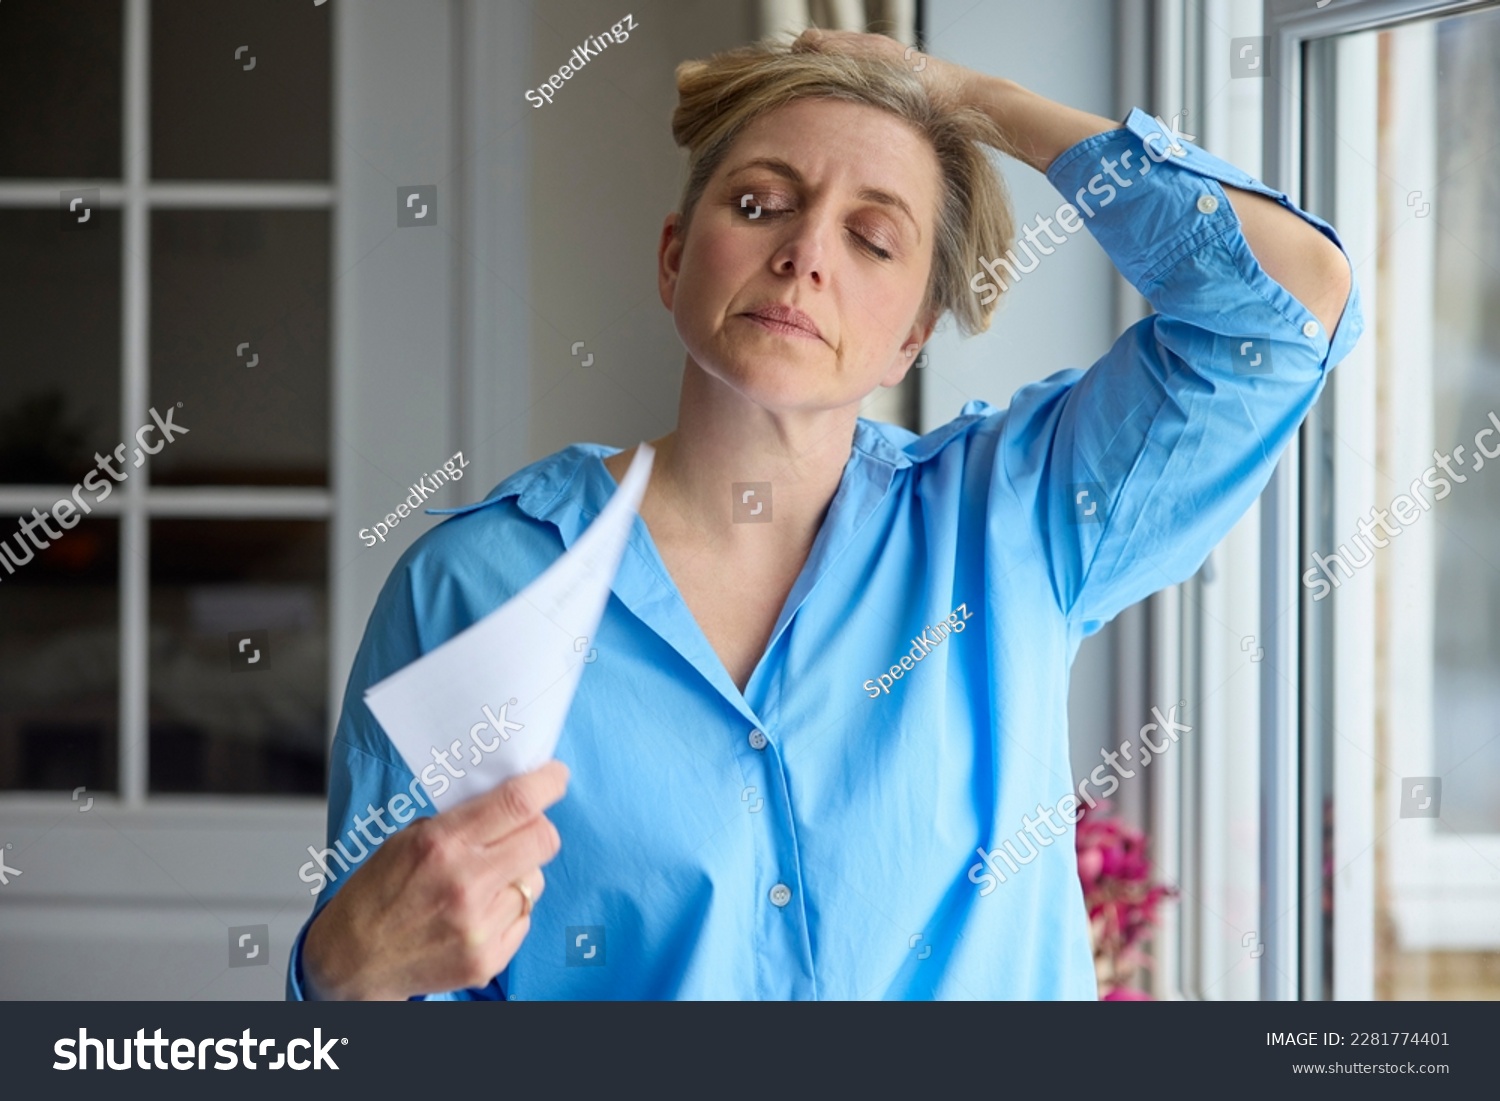 Menopausal Mature Woman Having Hot Flush At Home Cooling Herself With Letters Or Documents #2281774401